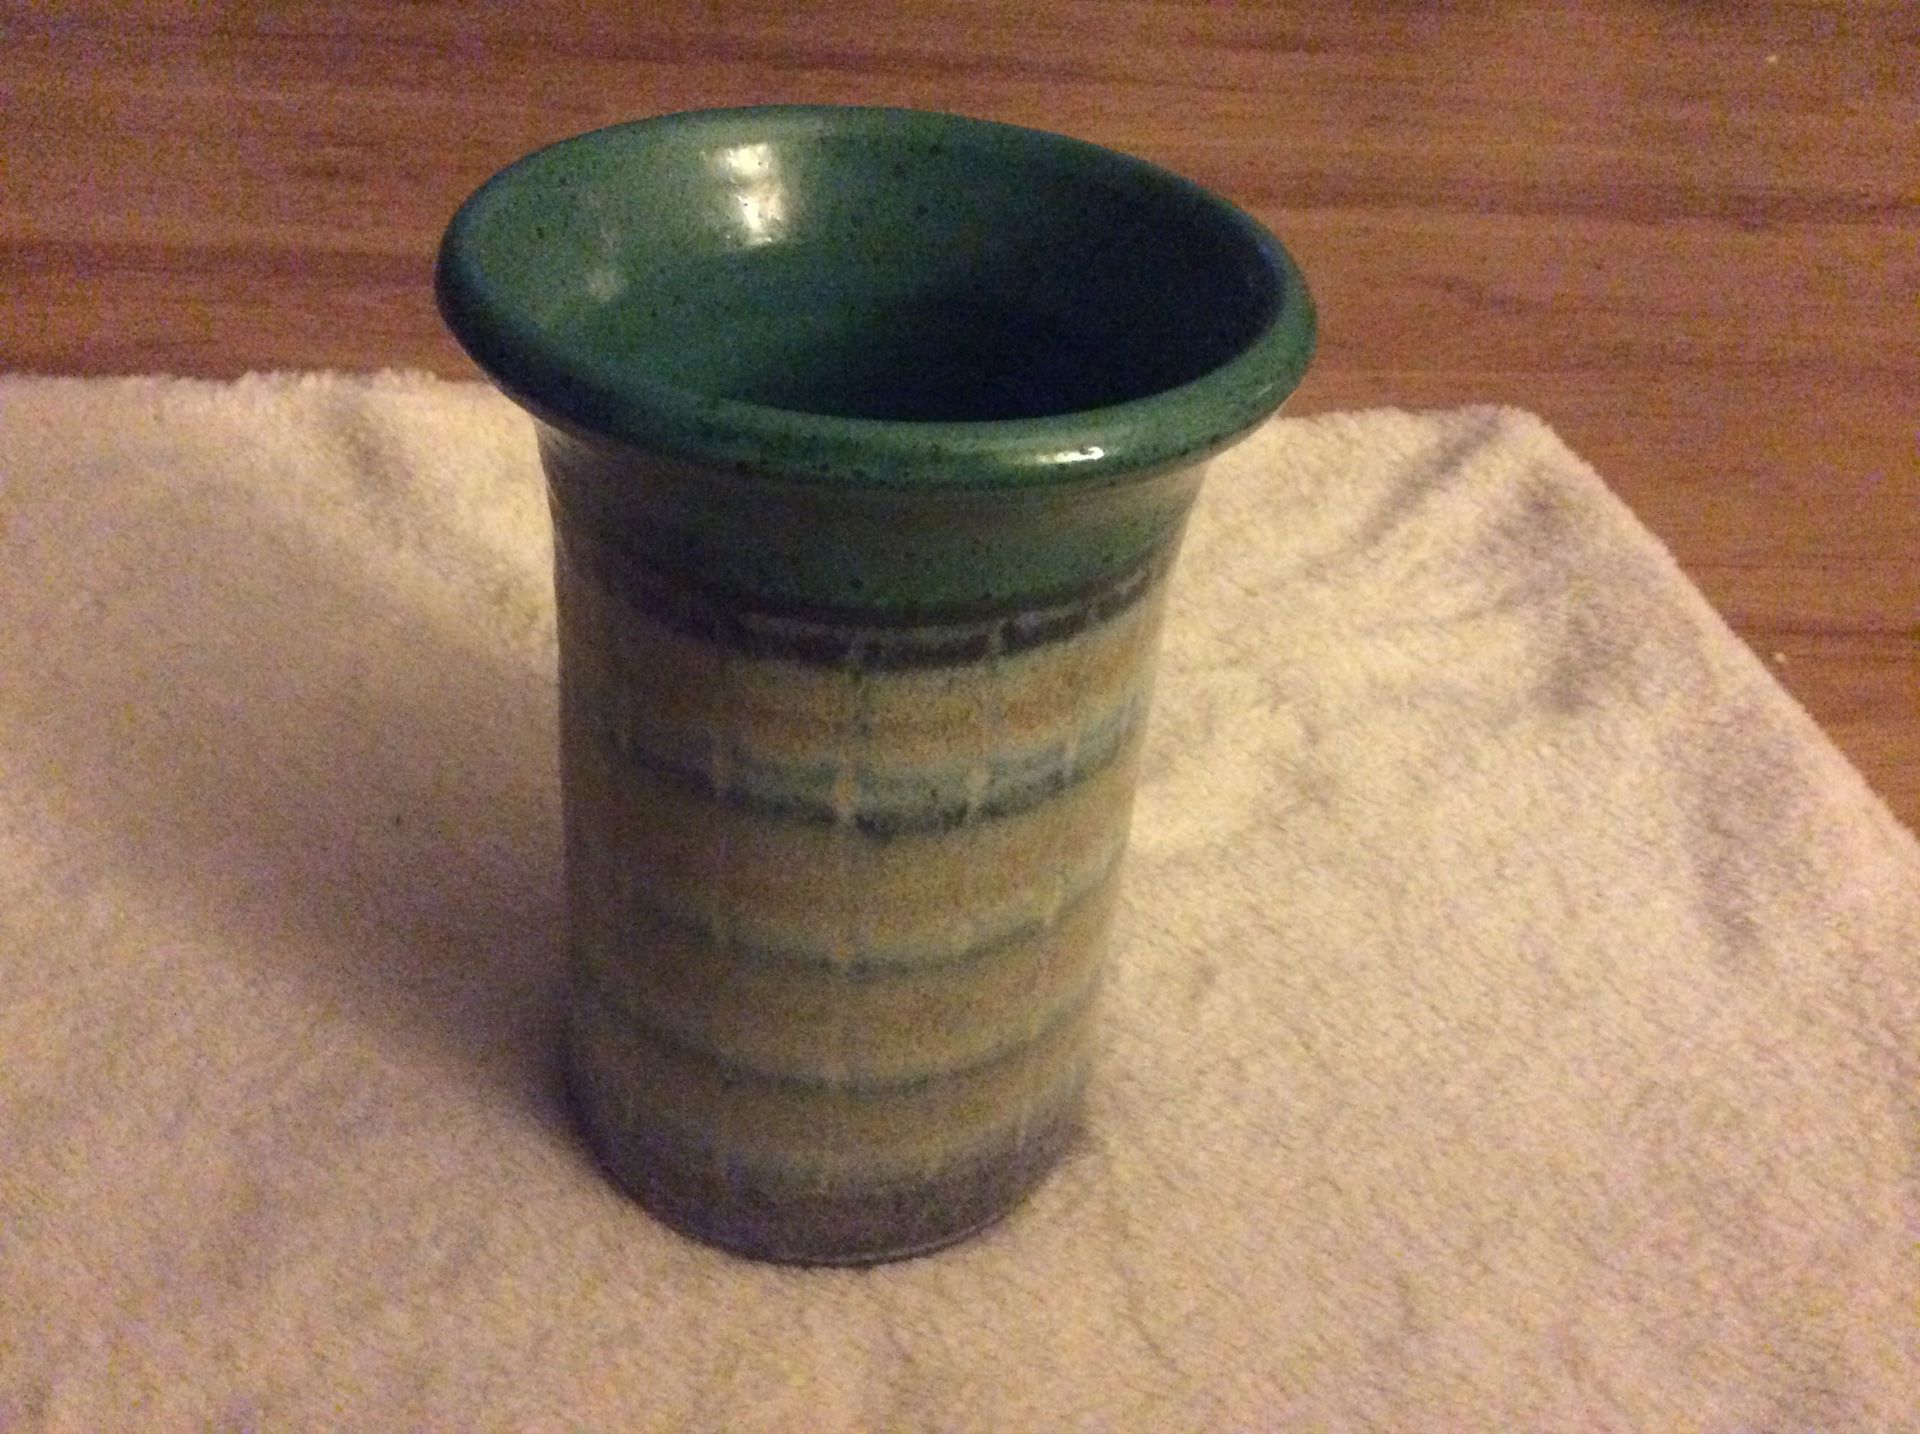 Pottery vase or use in kitchen to hold utilities